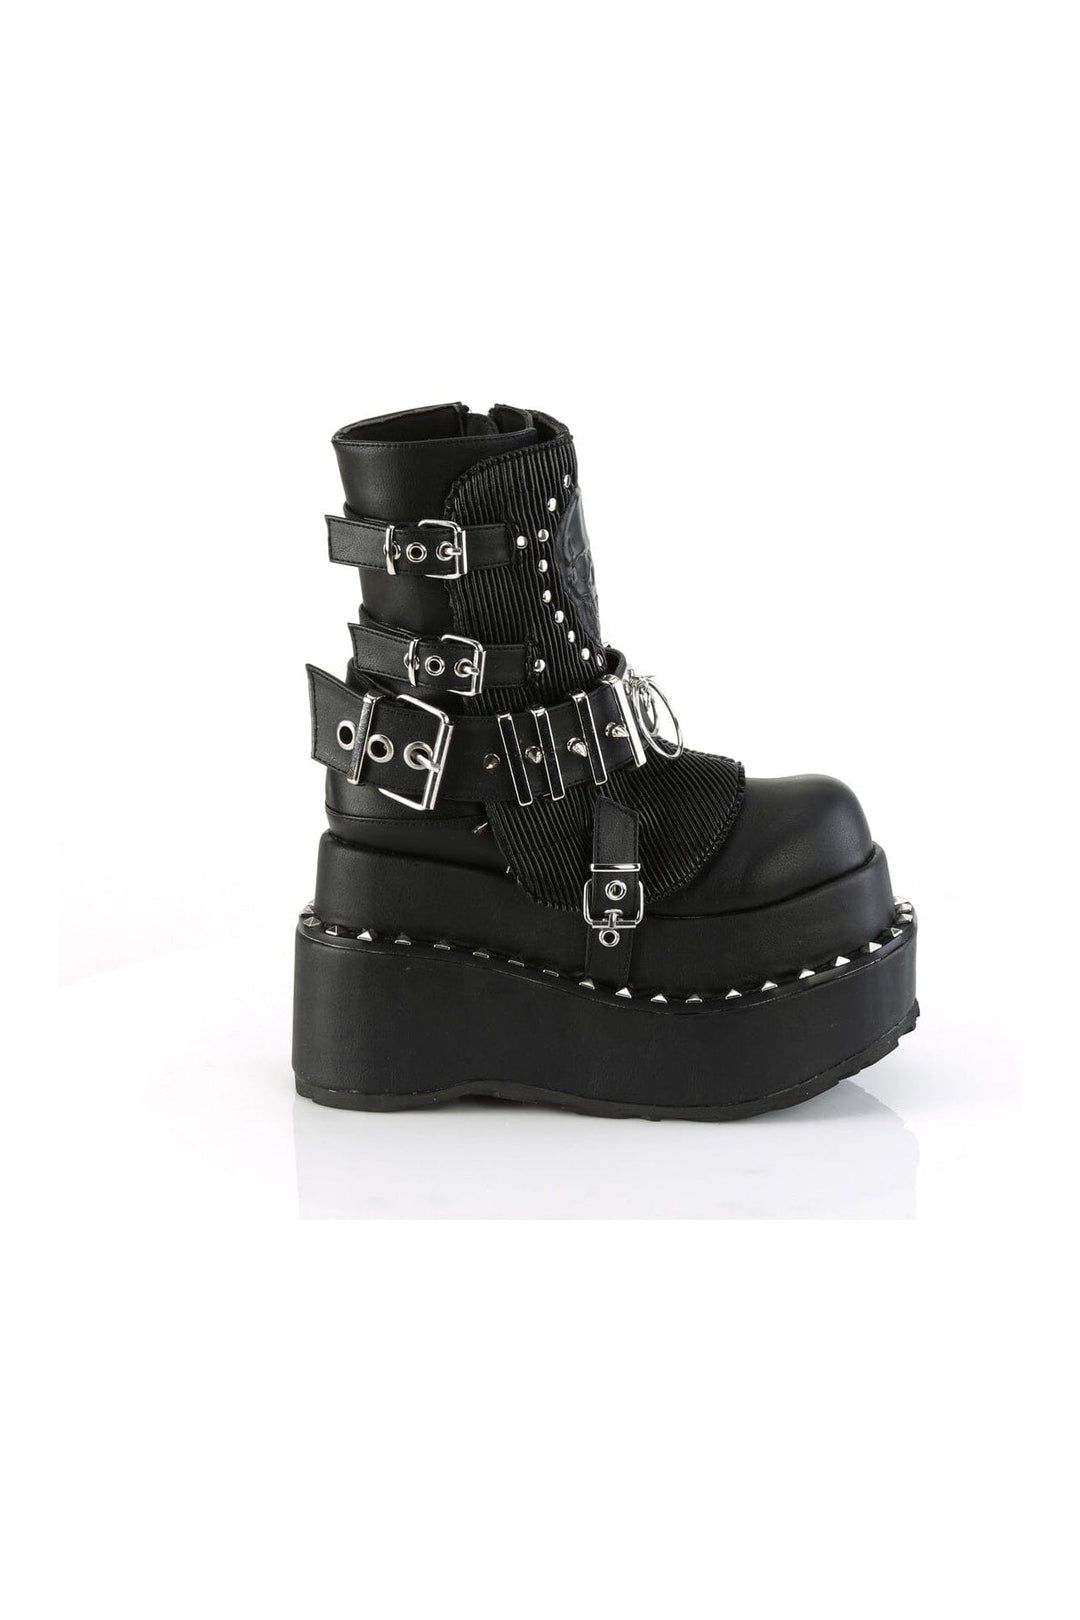 BEAR-150 Black Vegan Leather Ankle Boot-Ankle Boots-Demonia-SEXYSHOES.COM